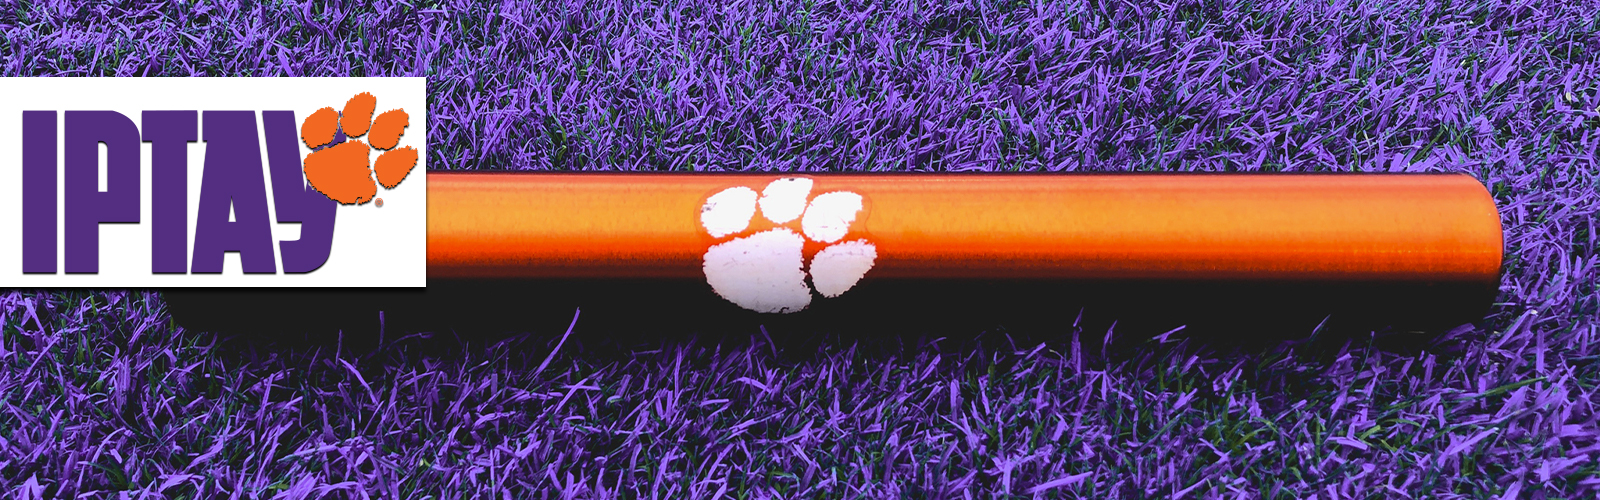 IPTAY logo for Track and Field